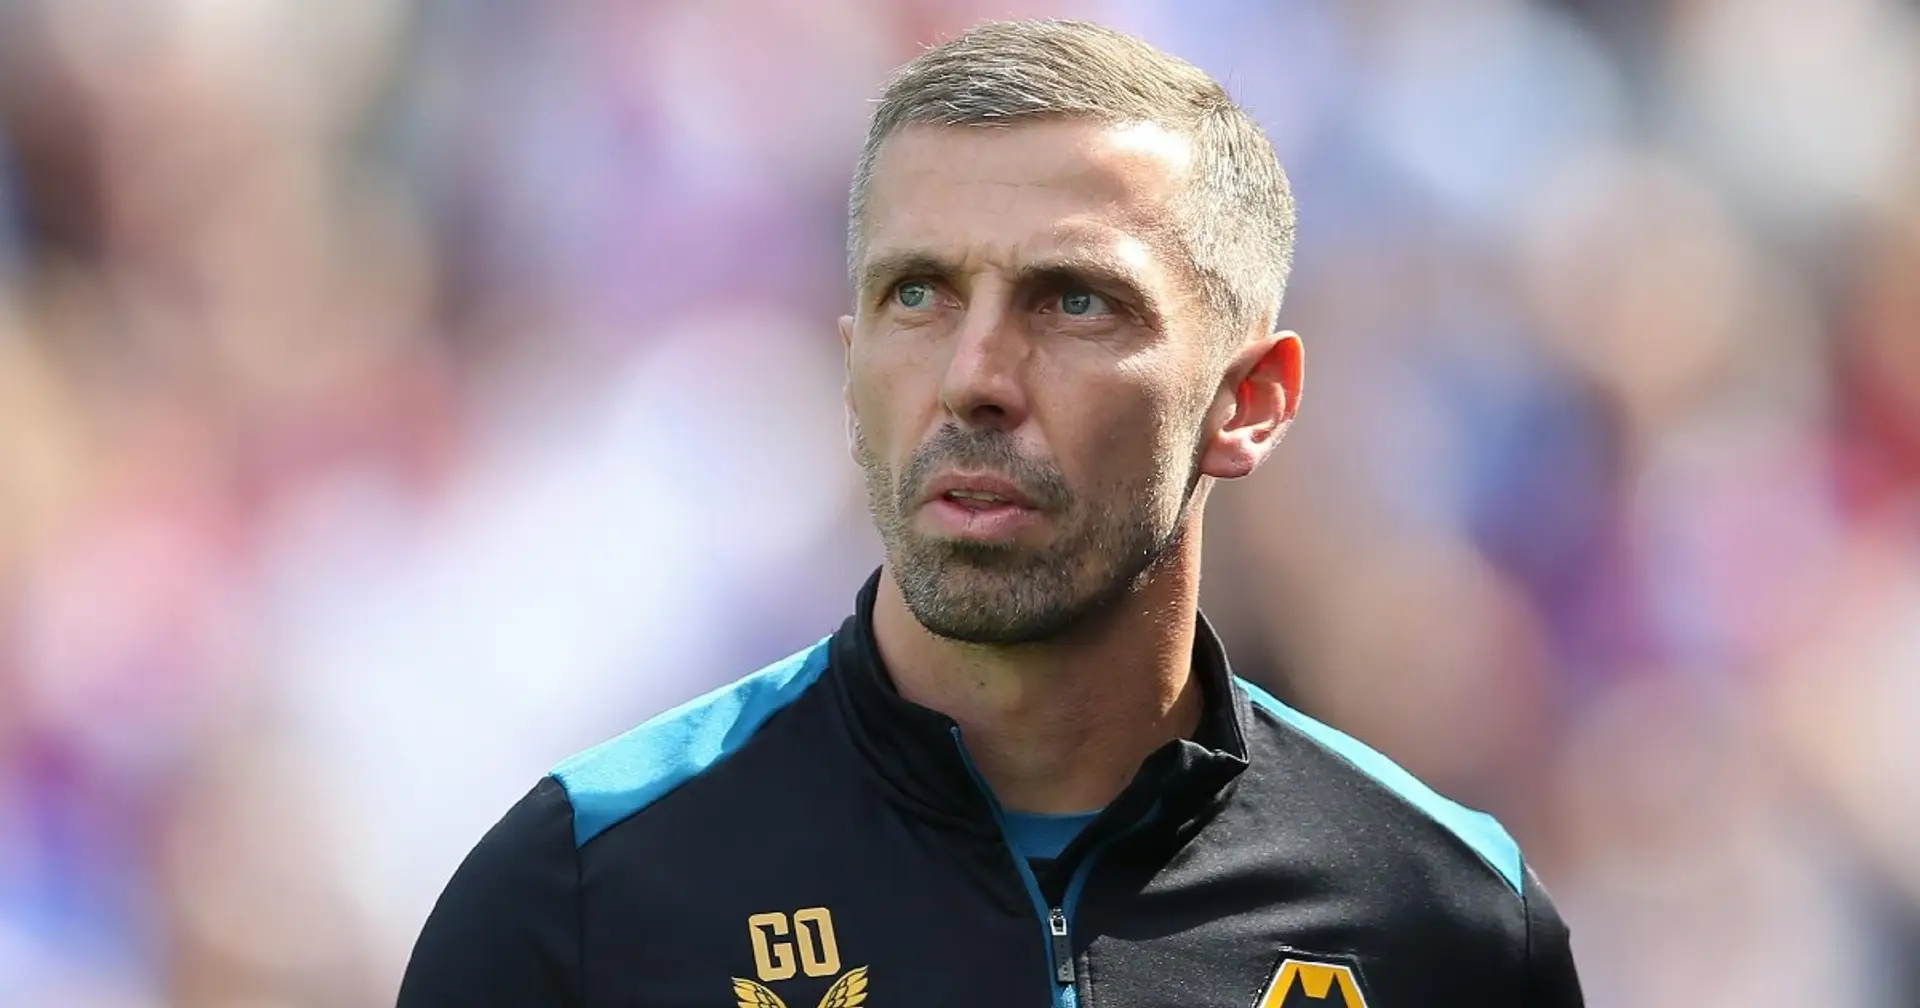 Wolves to offer Gary O'Neil new contract amid Man United links (reliability: 3 stars)